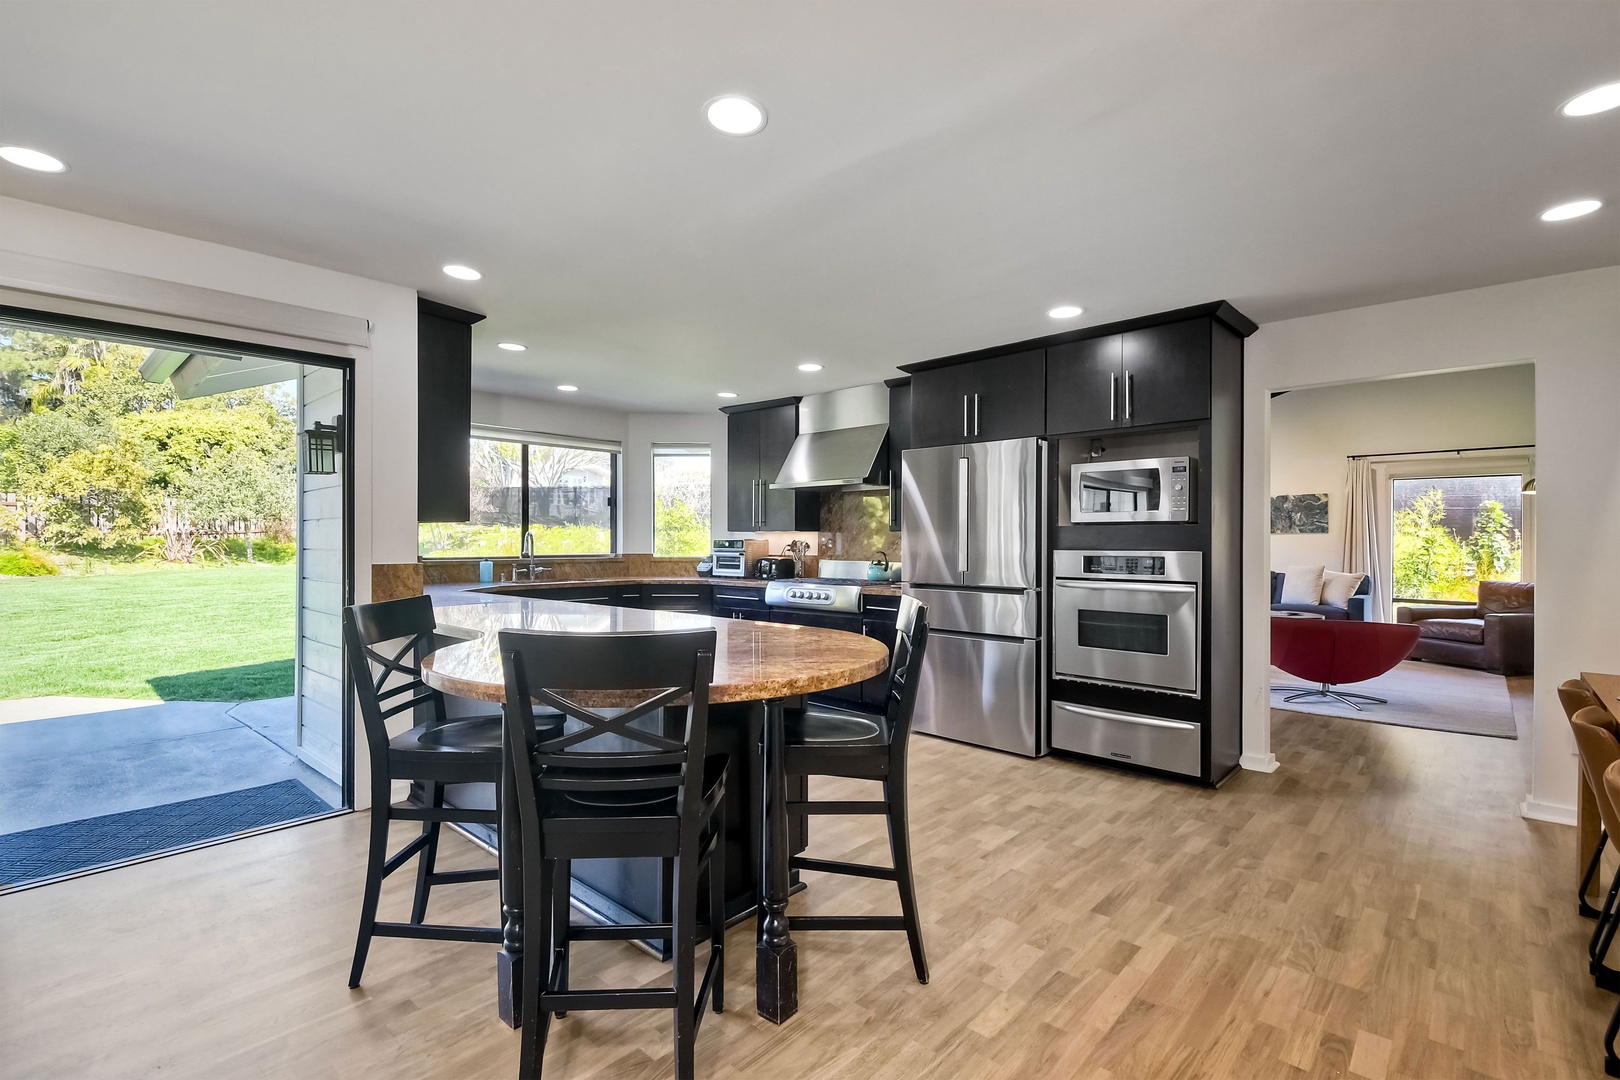 Sip morning coffee or grab a bite at the kitchen counter, with space for 3